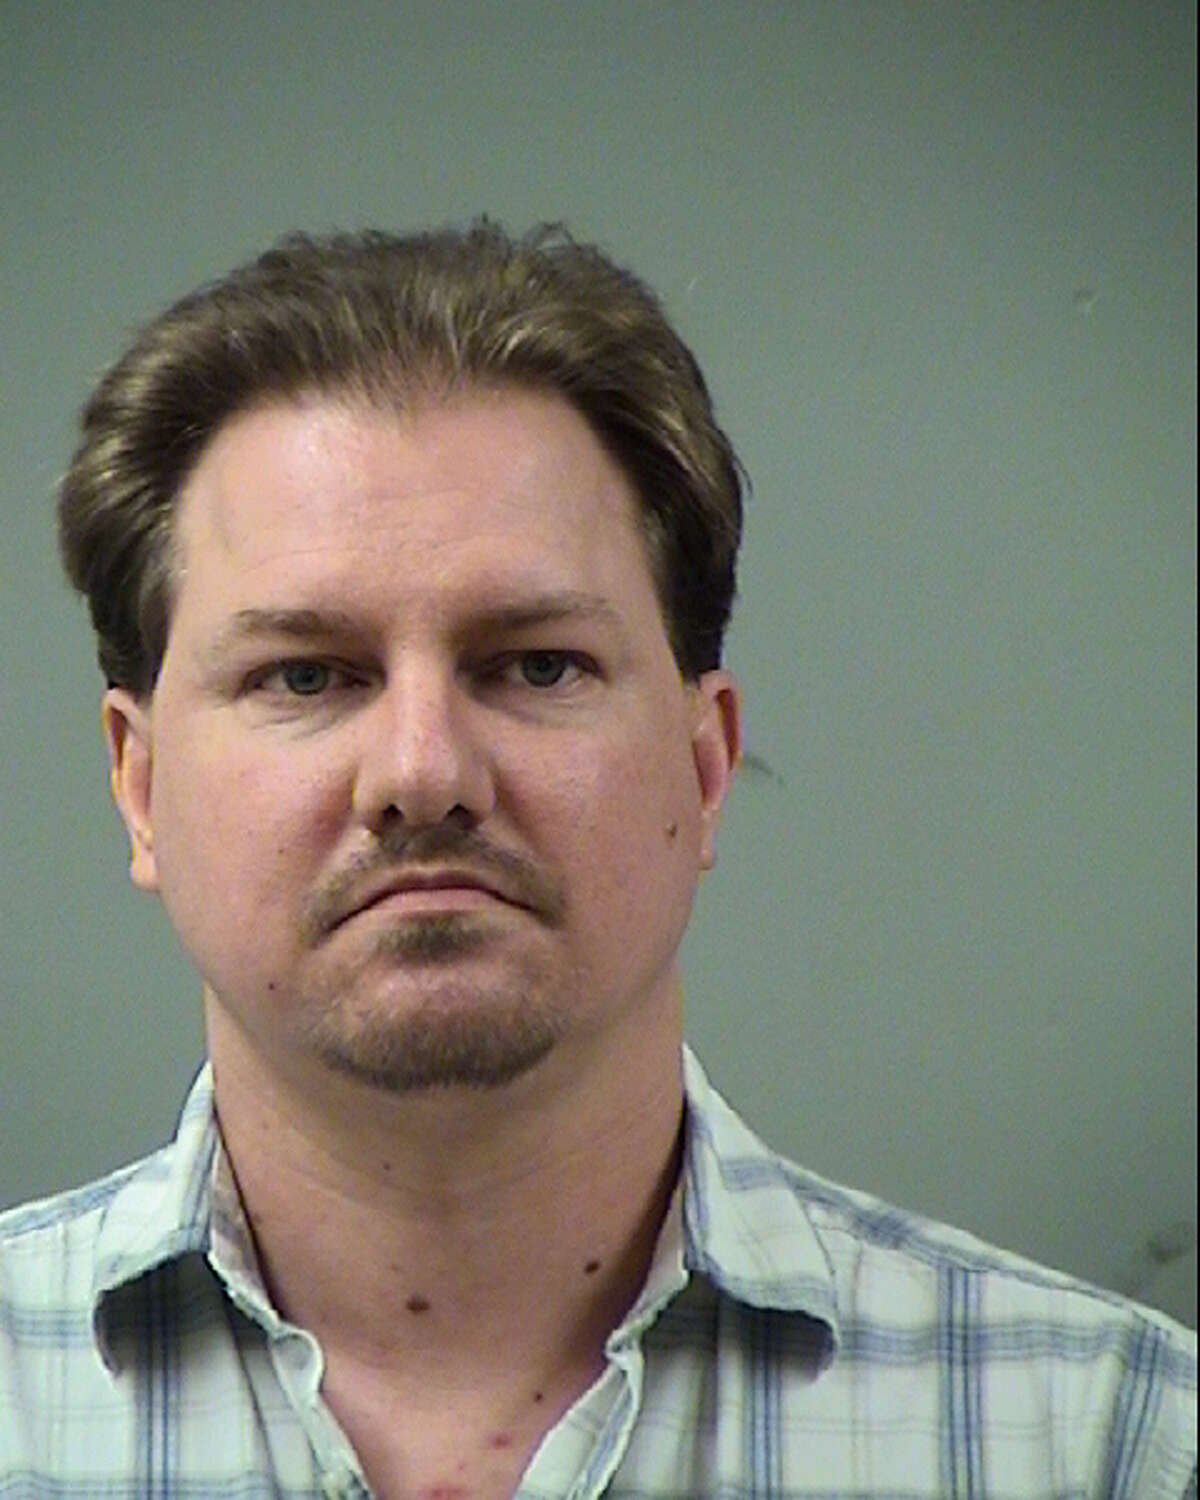 James Schwegmann, 38, was indicted March 15, 2017, on five first-degree felony counts of continuous sexual abuse of a child.